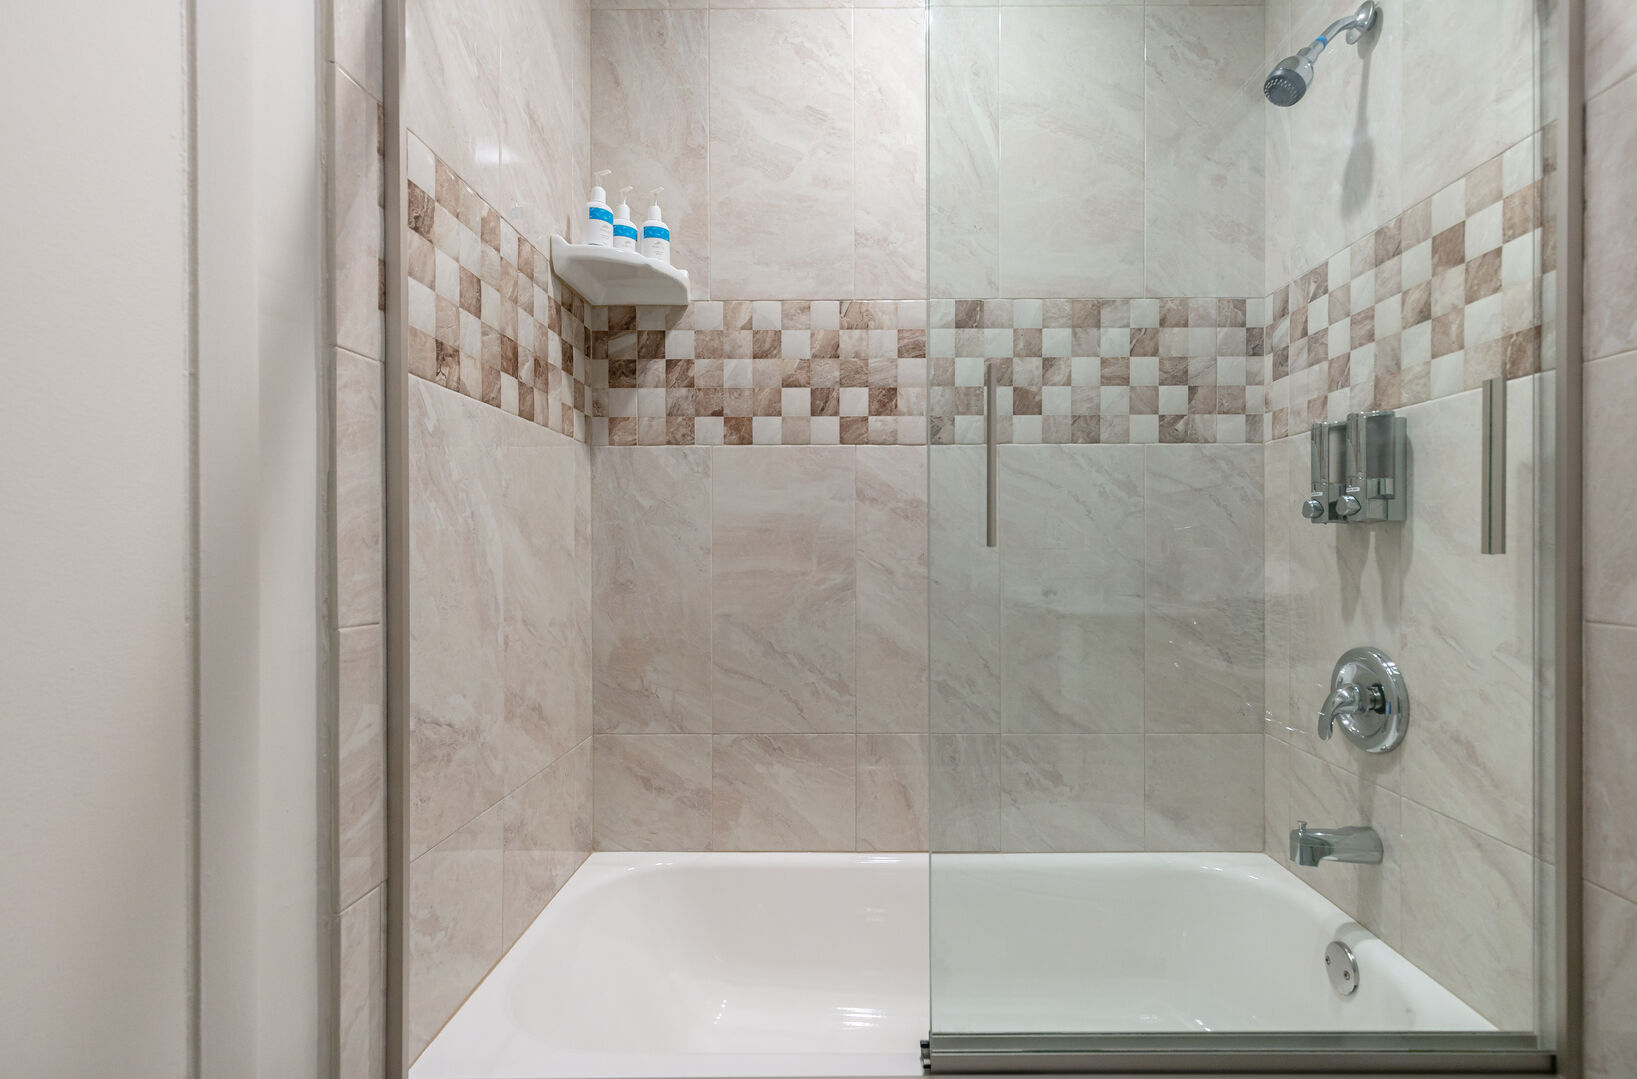 There is a shower/tub combo for quick showers or relaxing baths at the end of a day of sightseeing!